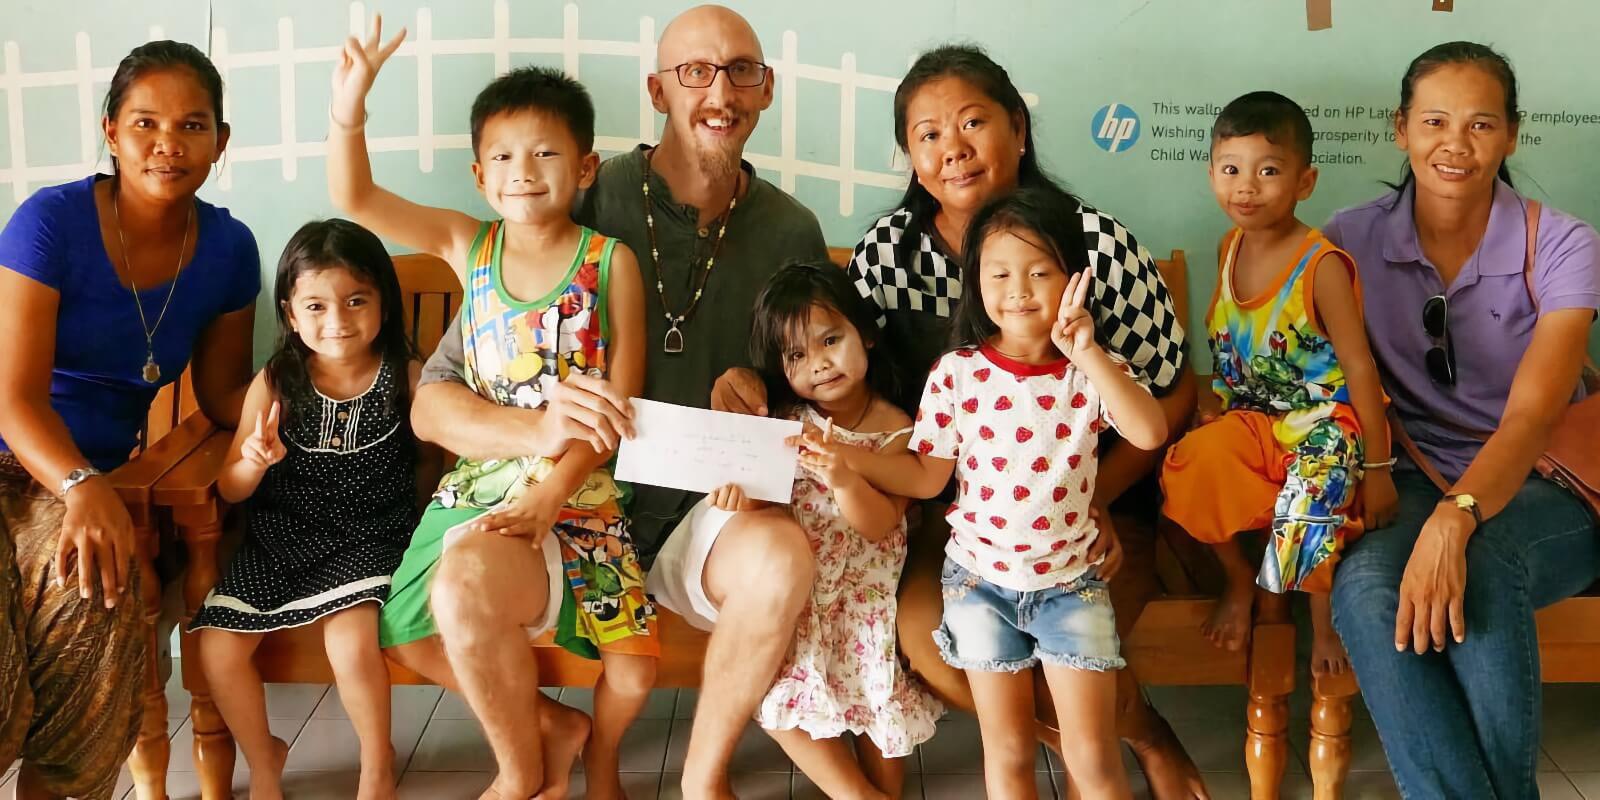 Tobi and Parn giving a Donation in an envelope to Childwatch Association in Phuket.